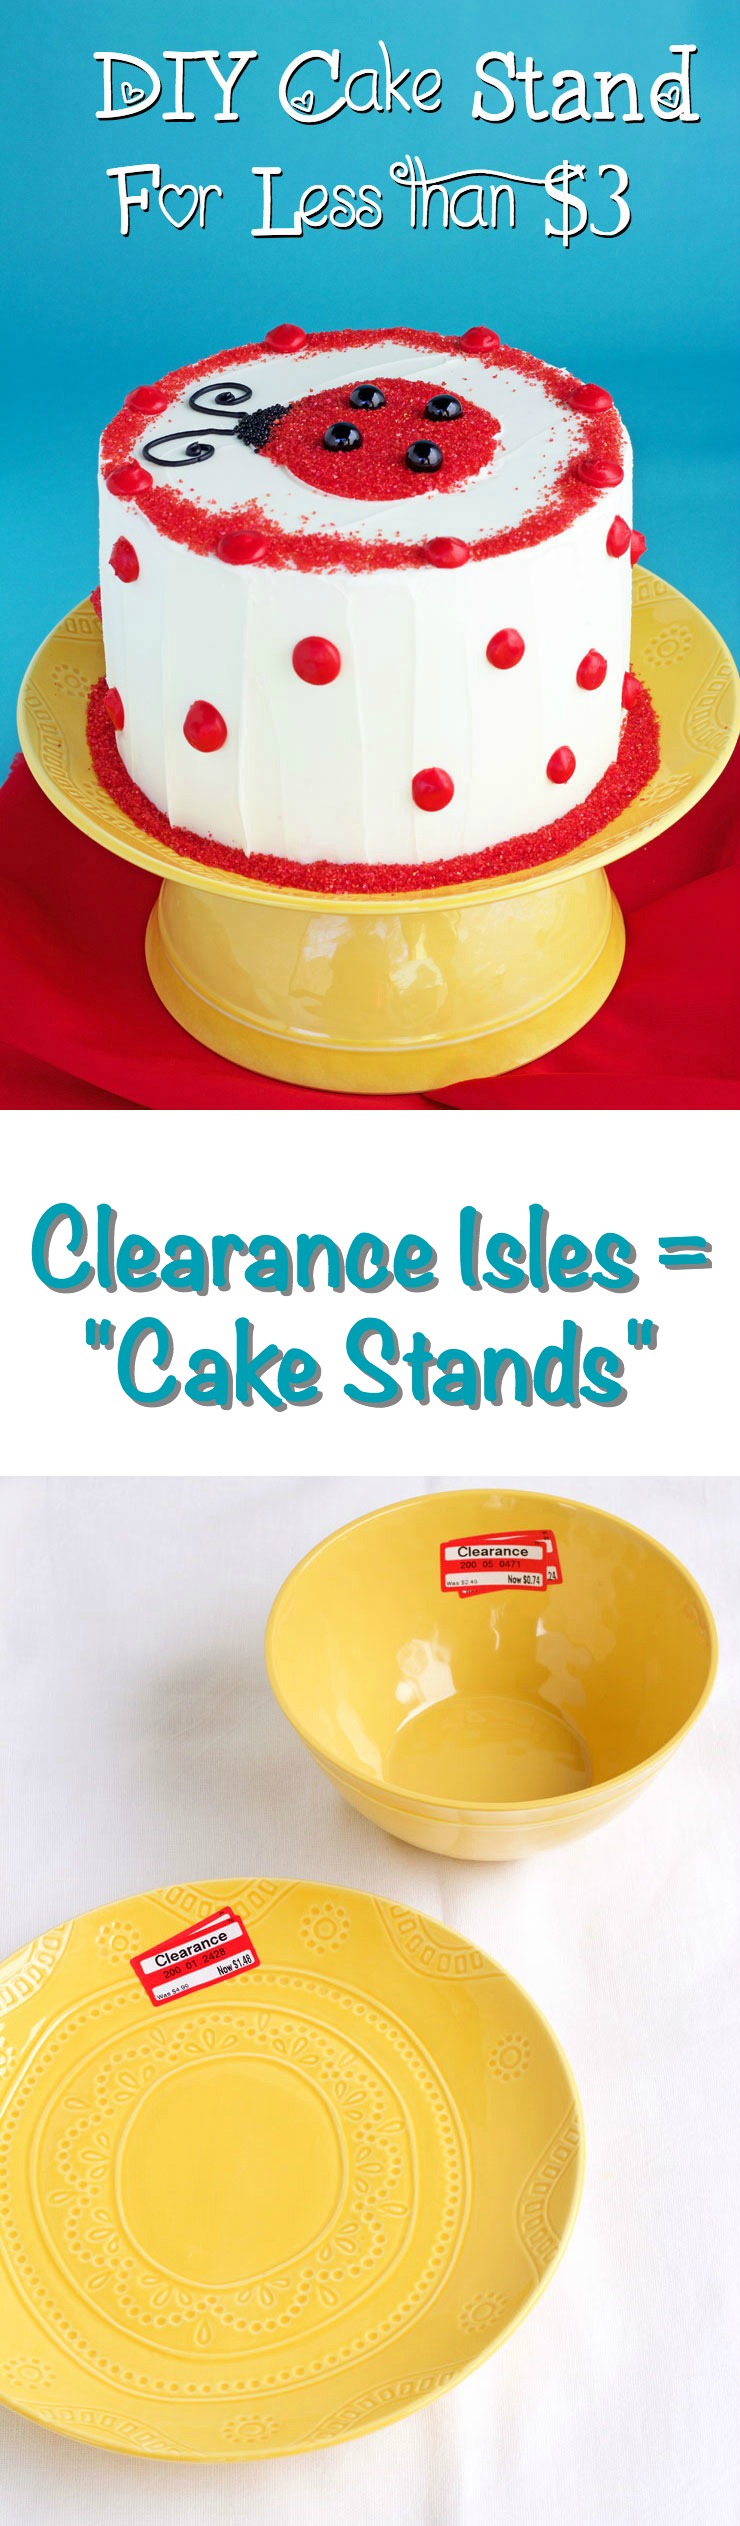 Simple-DIY-Cake-Stand-for-less-than-$3-www.thebearfootbaker